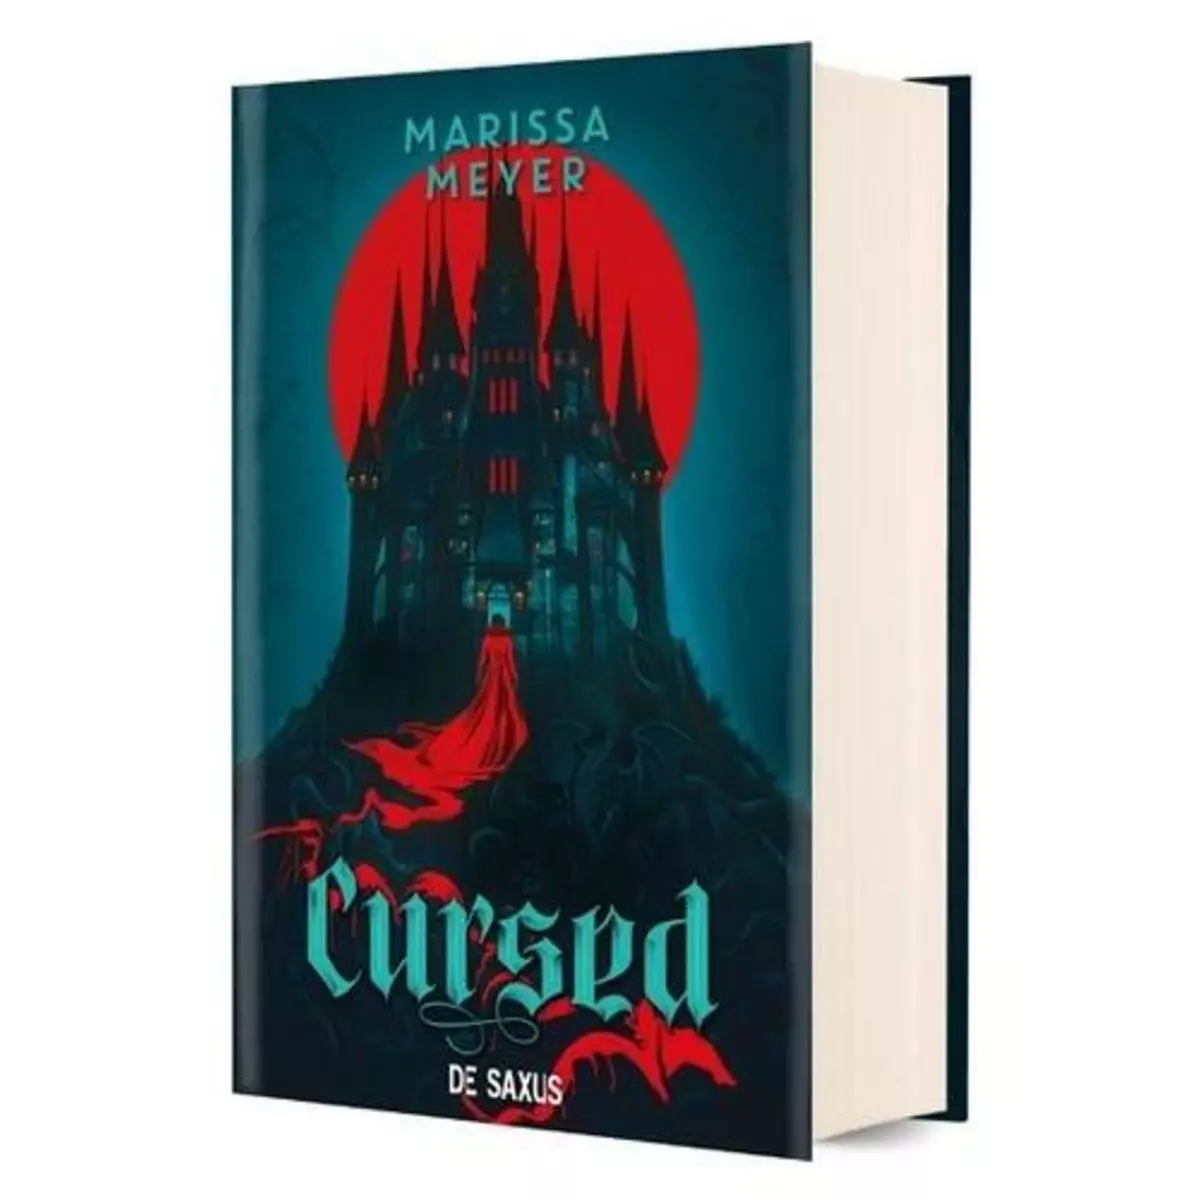  GILDED TOME 2 : CURSED. EDITION COLLECTOR, Meyer Marissa